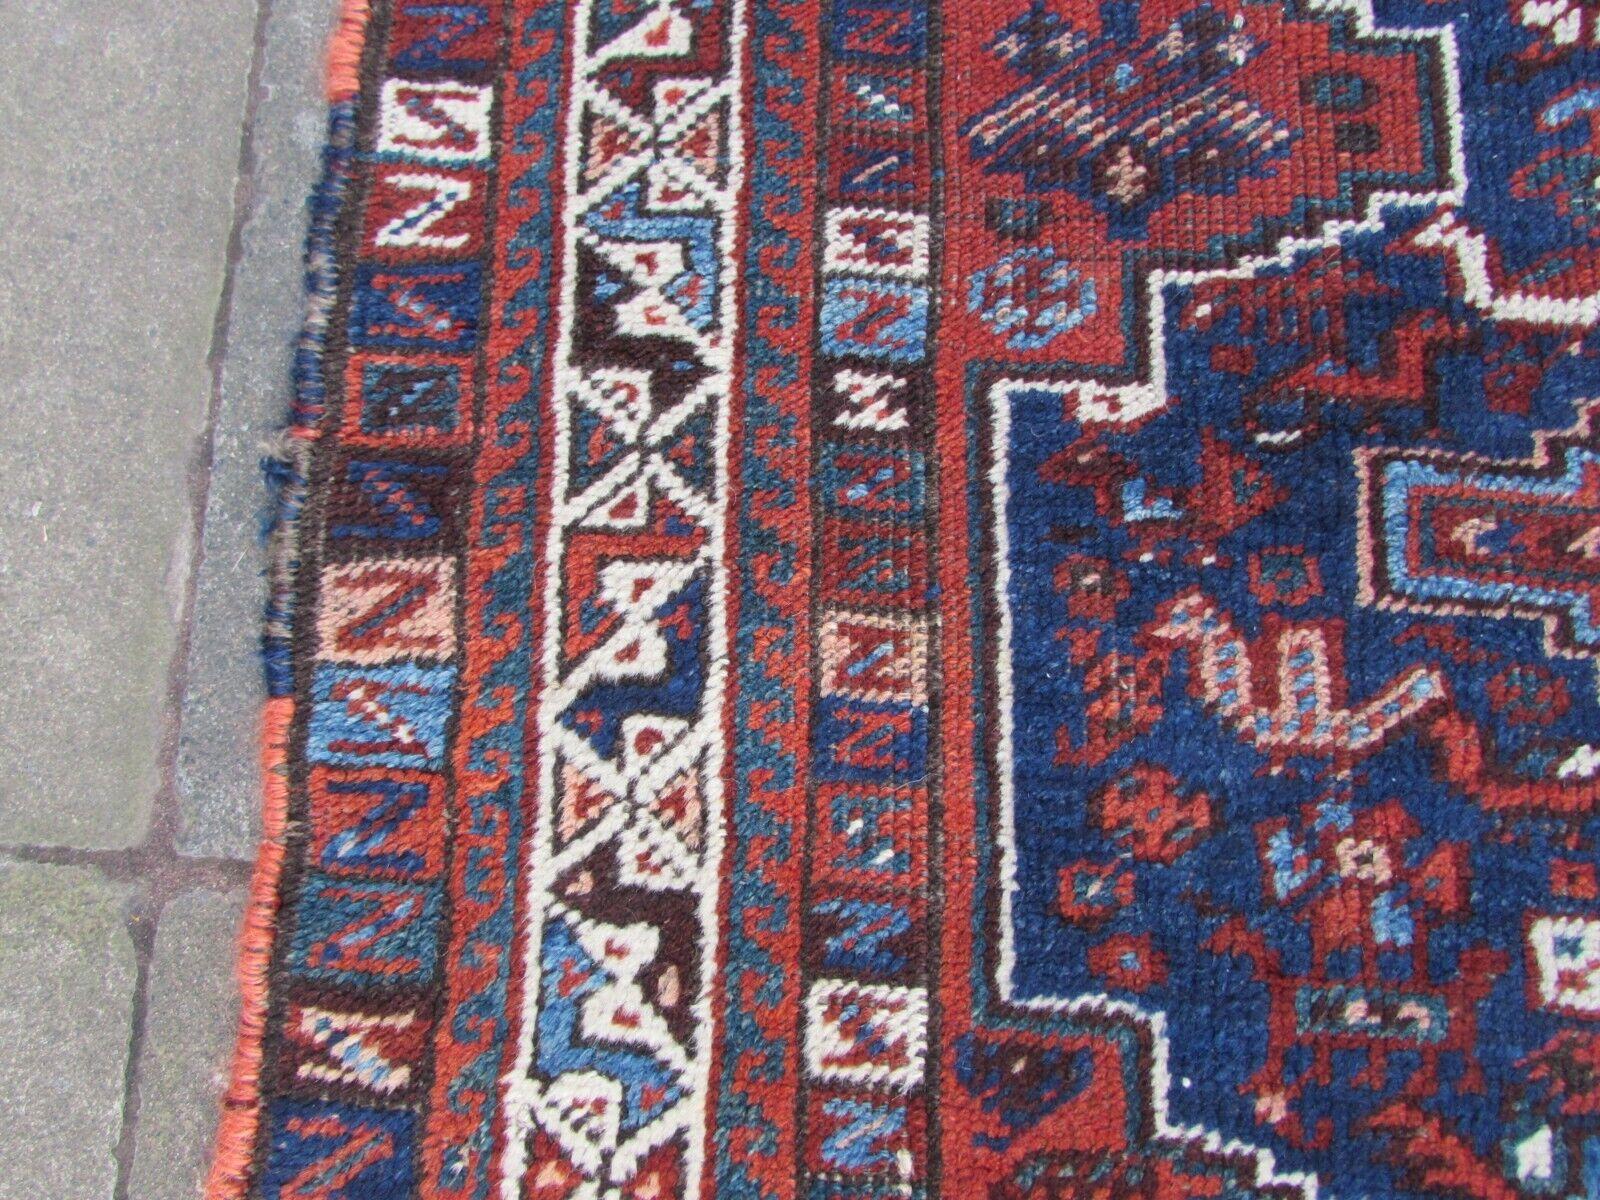 French Handmade Antique Persian Style Shiraz Rug 3.9' x 4.9', 1920s, 1Q62 For Sale